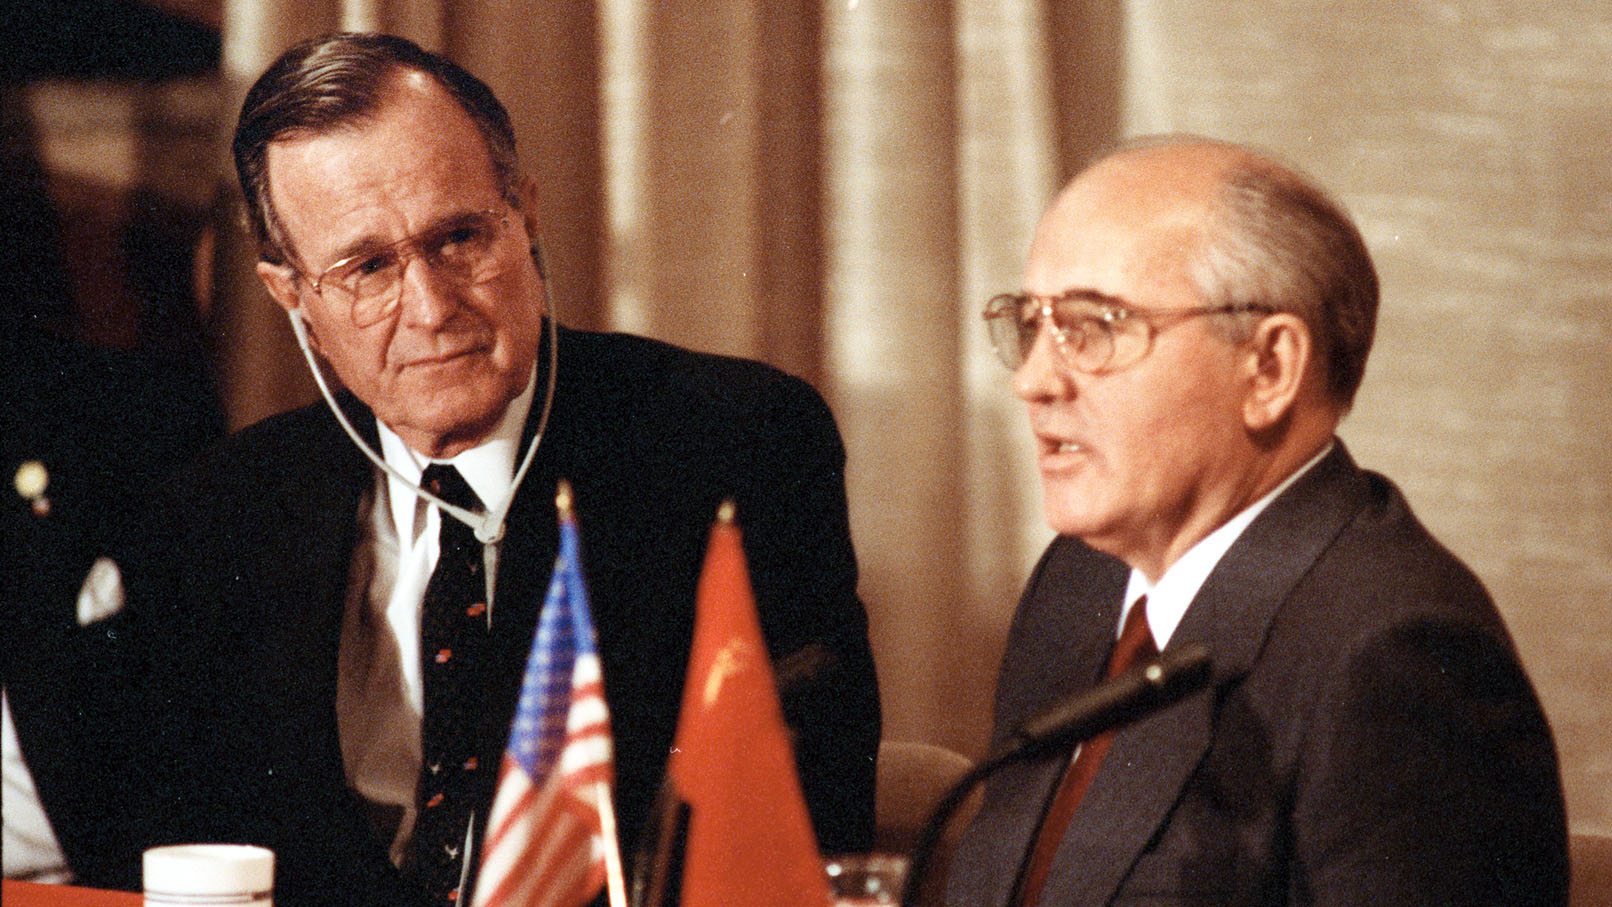 Bush and Gorbachev at Malta, December 1989 - the first time ever that an American President and Soviet General Secretary held a simultaneous joint press conference.